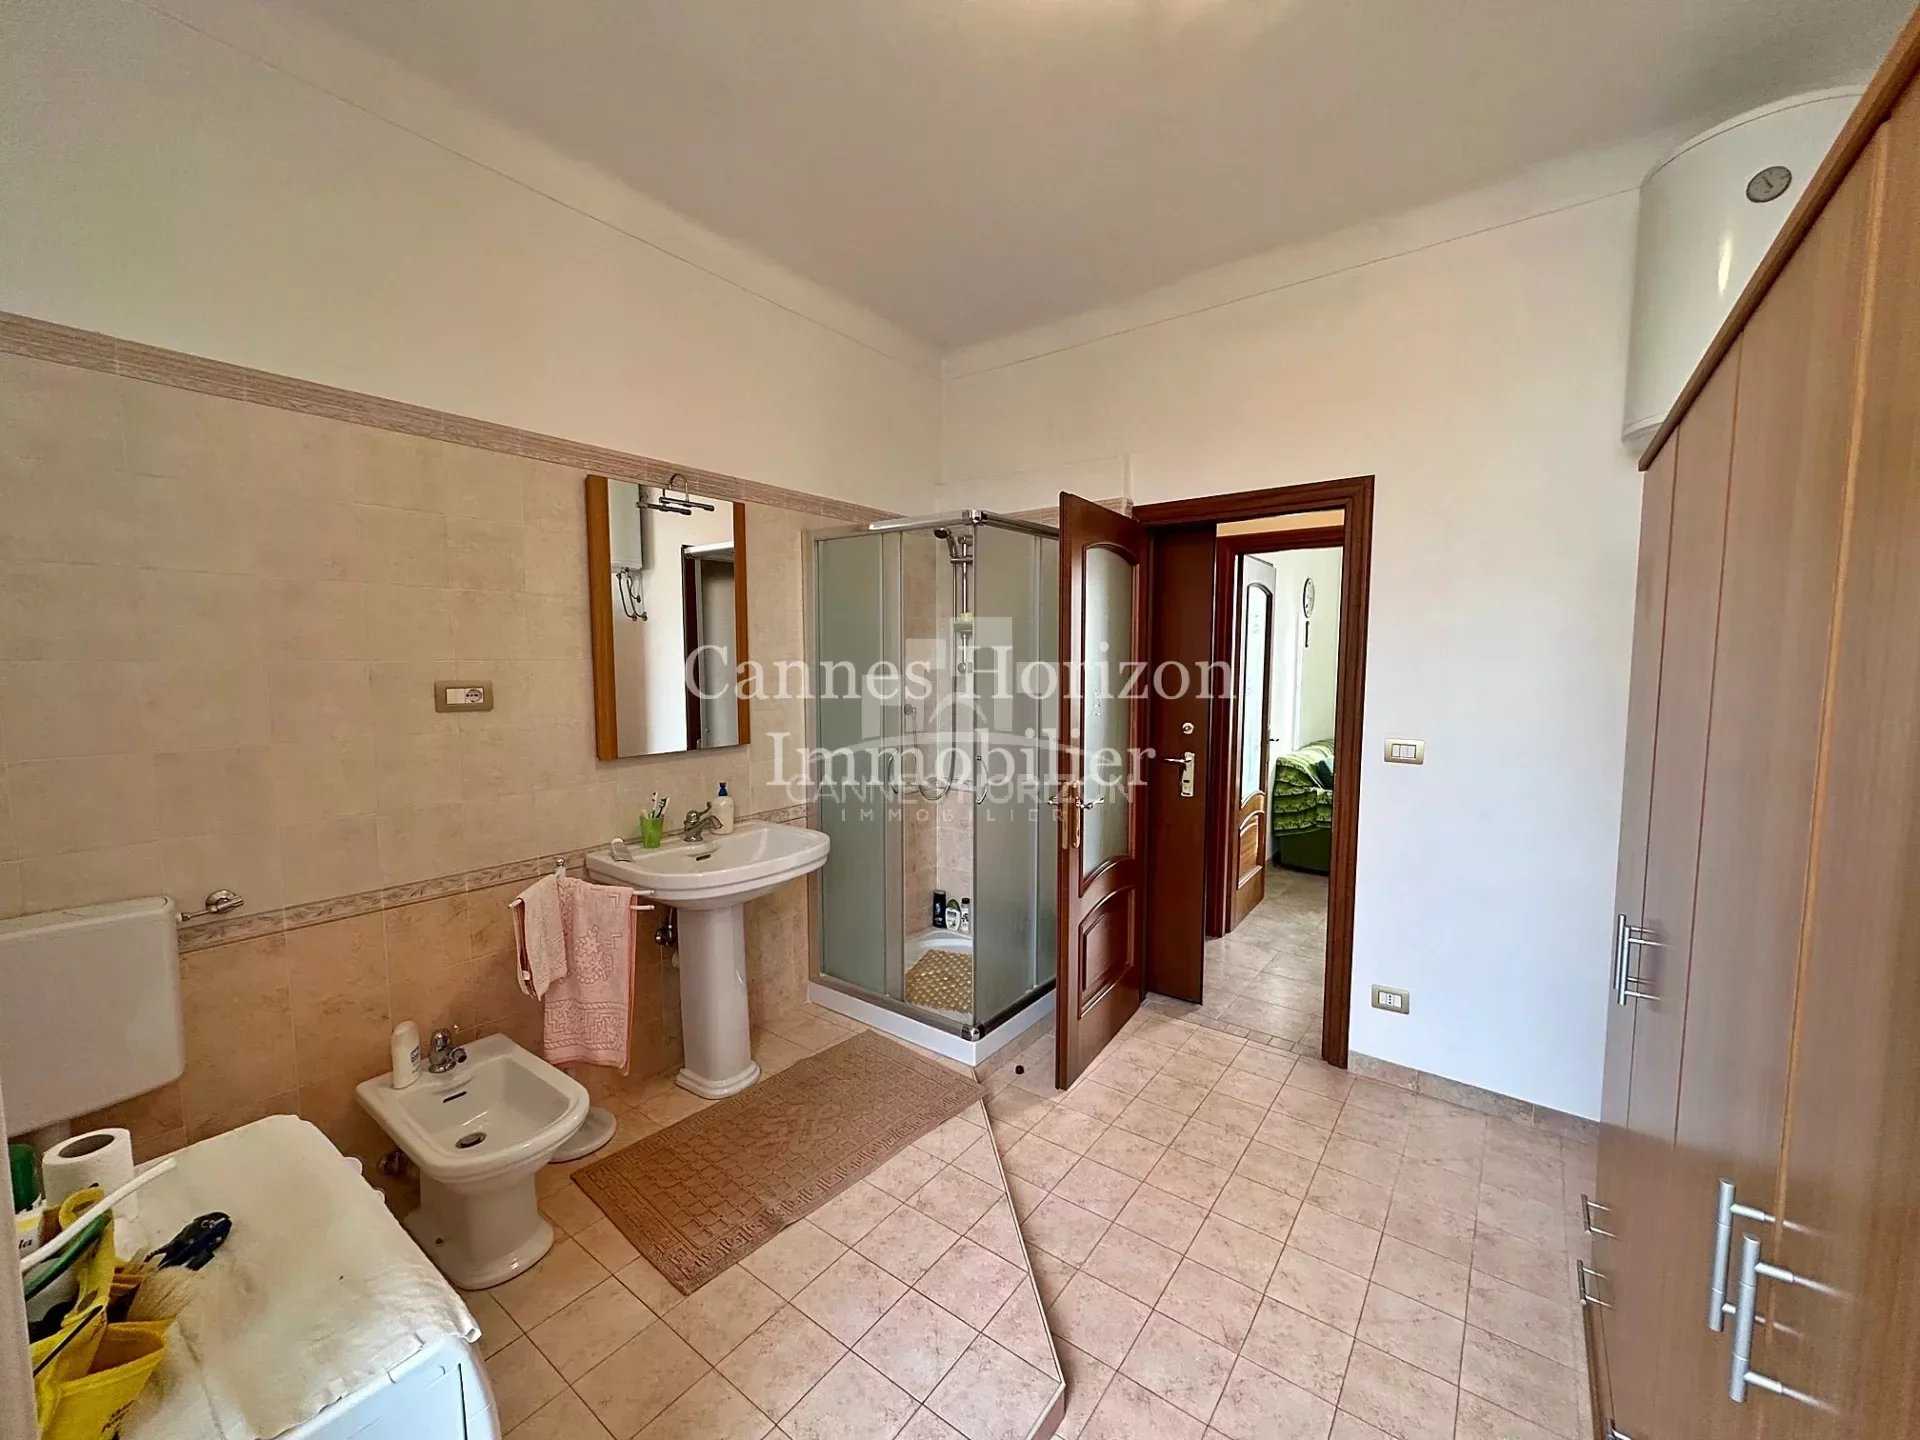 Residential in Cannes, Alpes-Maritimes 12366510